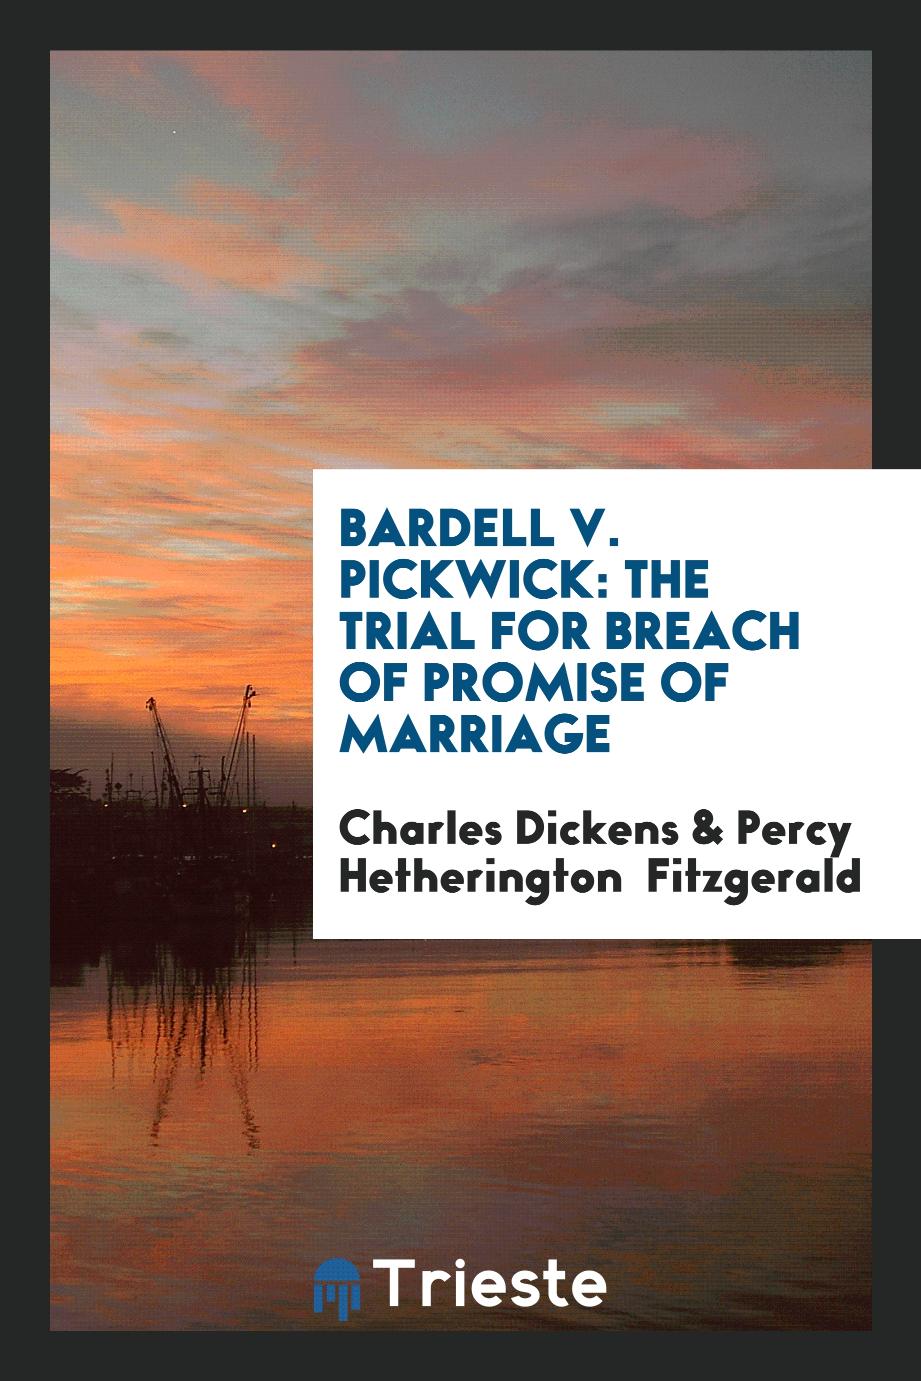 Bardell v. Pickwick: The Trial for Breach of Promise of Marriage